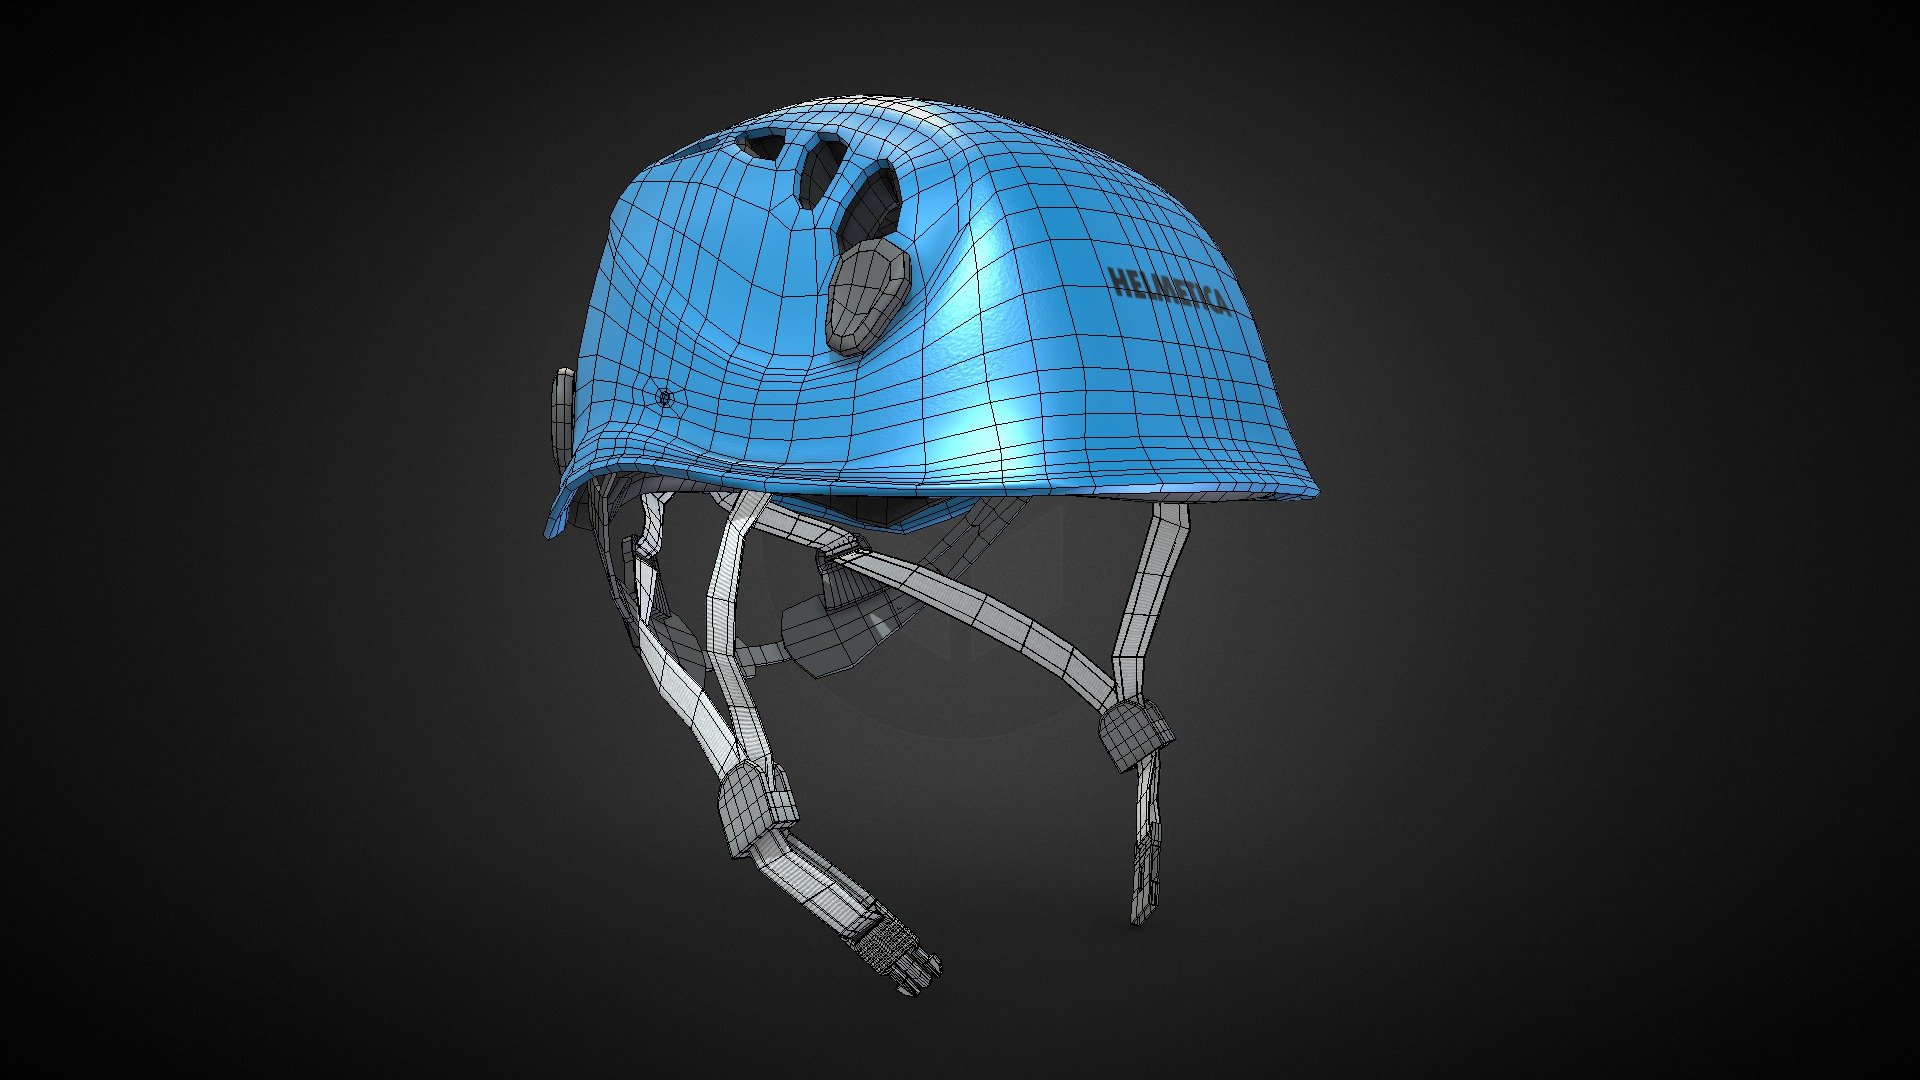 U can find this model for sale on Turbosquid by searching for “3d 1348189”( that’s the closest I can get to giving a link without breaking sketchfab’s ToS)



Details:




Units: cm ( 29x22x15 )

LOD 0 = Polys: 9,821 
                Verts: 9,728

Textures Formats:




(5) Shell 4096x4096   ****** PNG

(4) Pad 4096x4096   *** PNG

(1) Accessories 4096x4096 ***** JPEG

File Formats:




3ds Max 2012 V-Ray 2.4

3ds Max 2014 V-Ray 3.6

3ds Max 2017 V-Ray 3.6

OBJ

FBX
 - Bicycle Helmet - 3D model by CGZarvandi 3d model